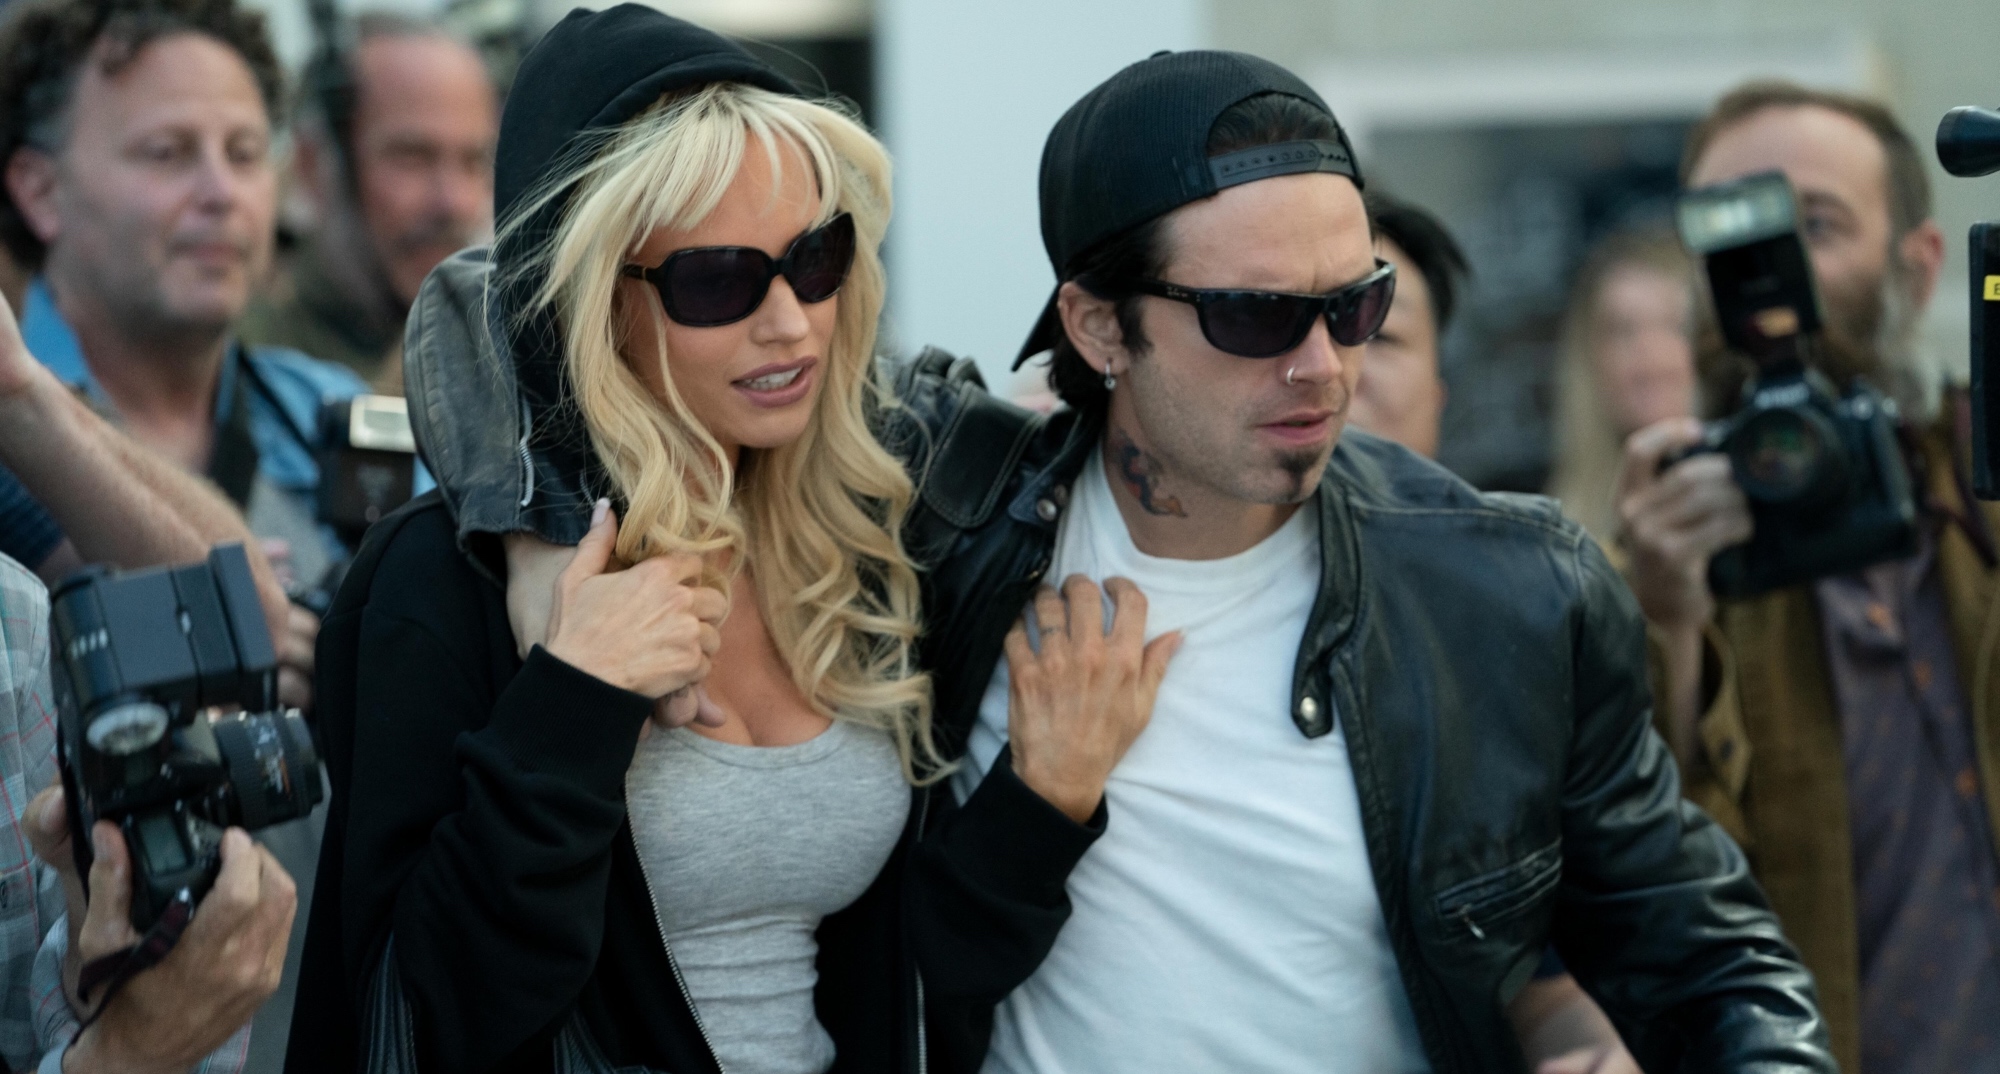 Lily James and Sebastian Stan in 'Pam & Tommy' series wearing sunglasses surrounded by paparazzi.